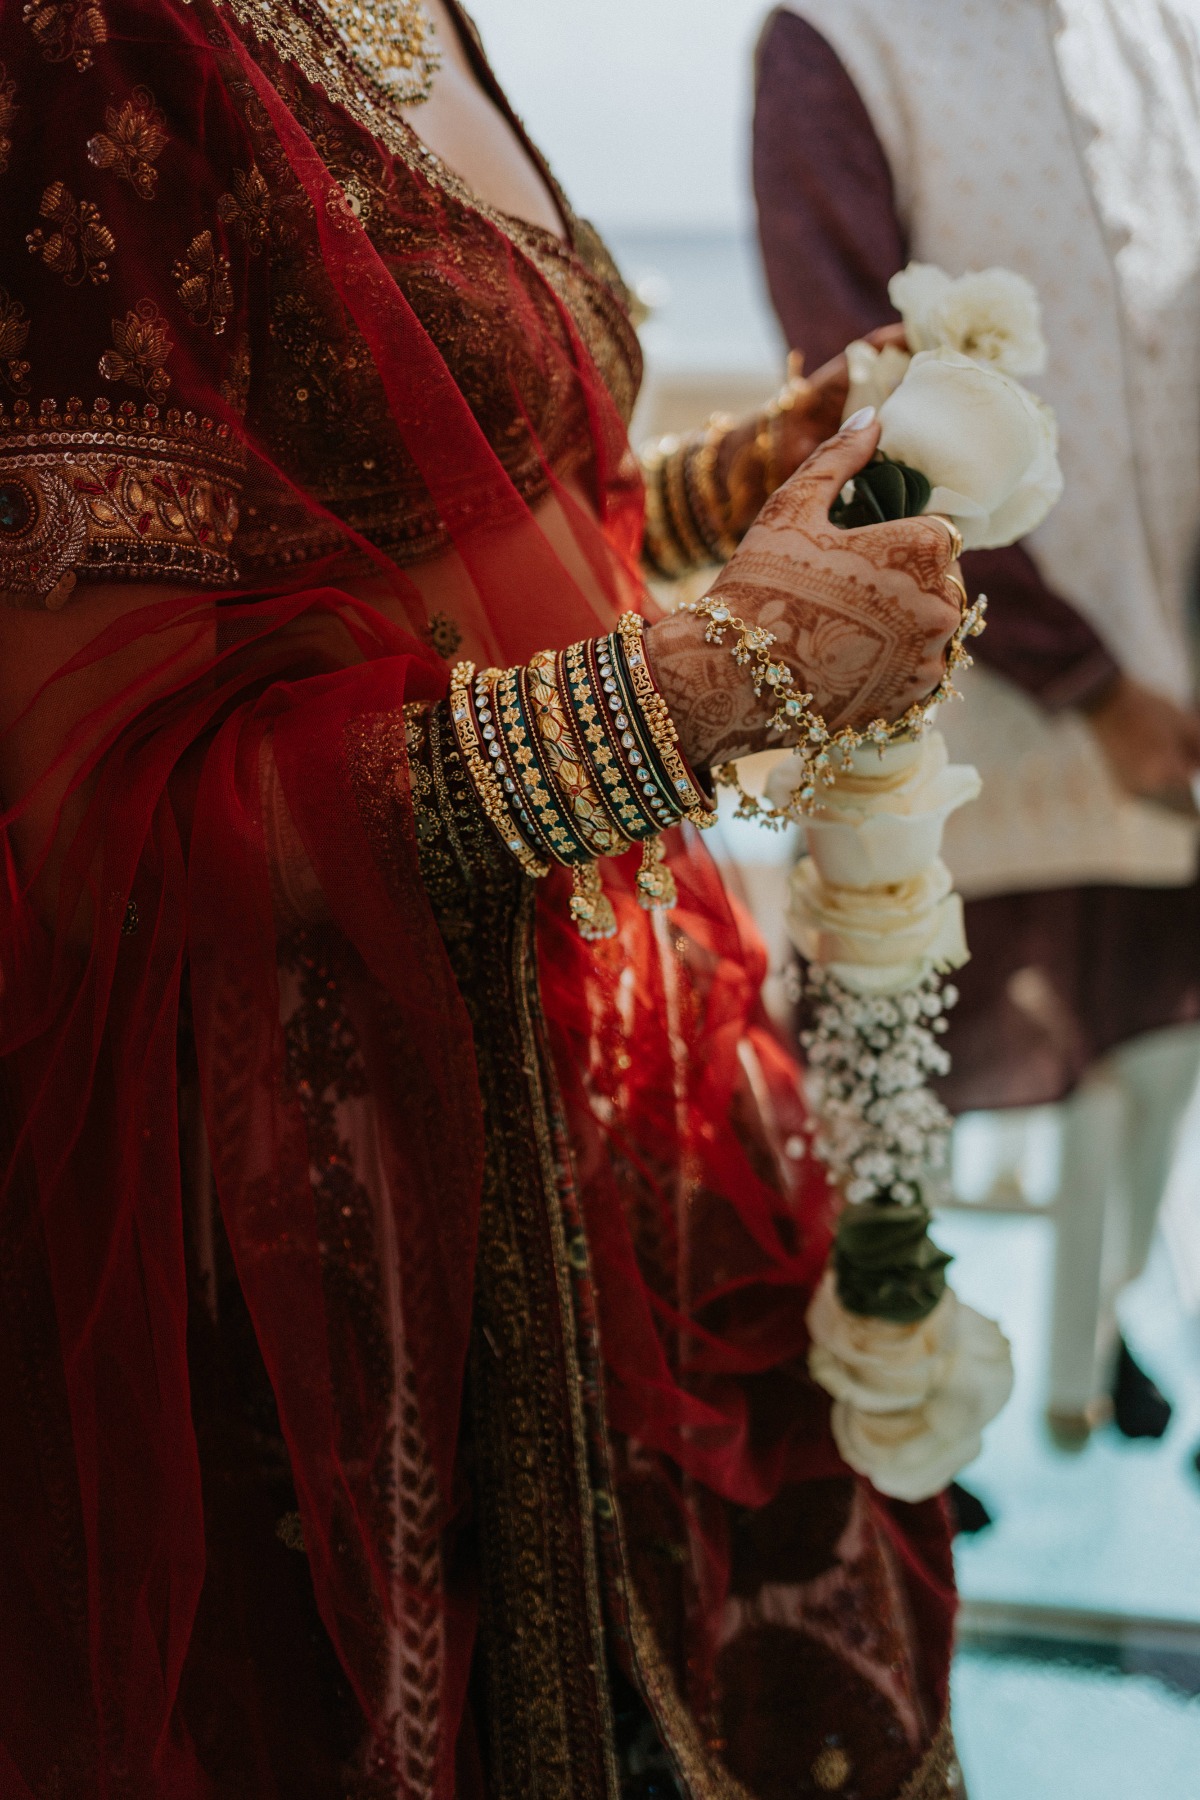 bride with henna wearing a red sari during a Hindu wedding ceremony